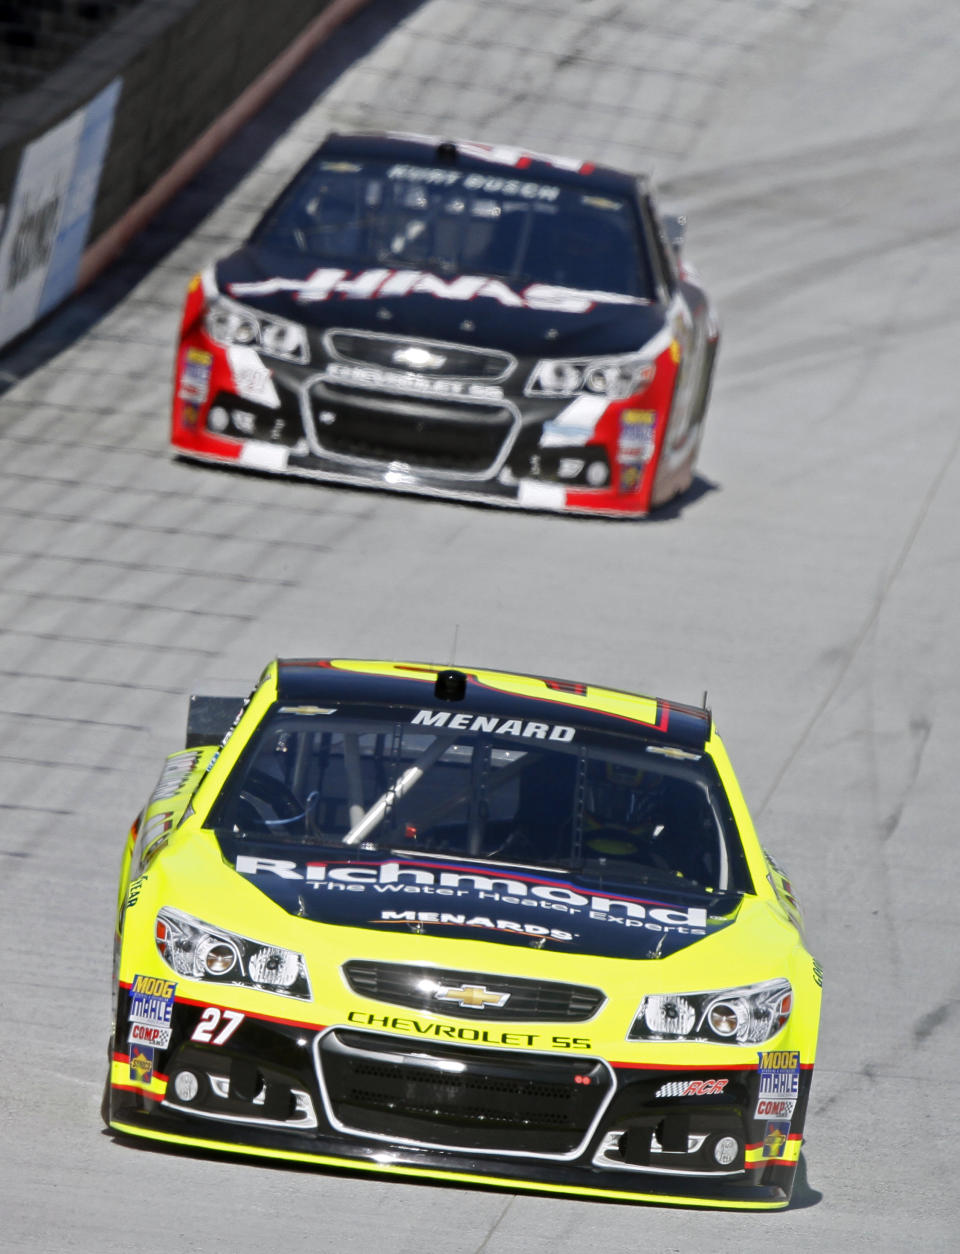 Driver Paul Menard (27) leads Kurt Busch (41) during practice for the NASCAR Sprint Cup series auto race at Bristol Motor Speedway on Friday, March 14, 2014, in Bristol, Tenn. (AP Photo/Wade Payne)